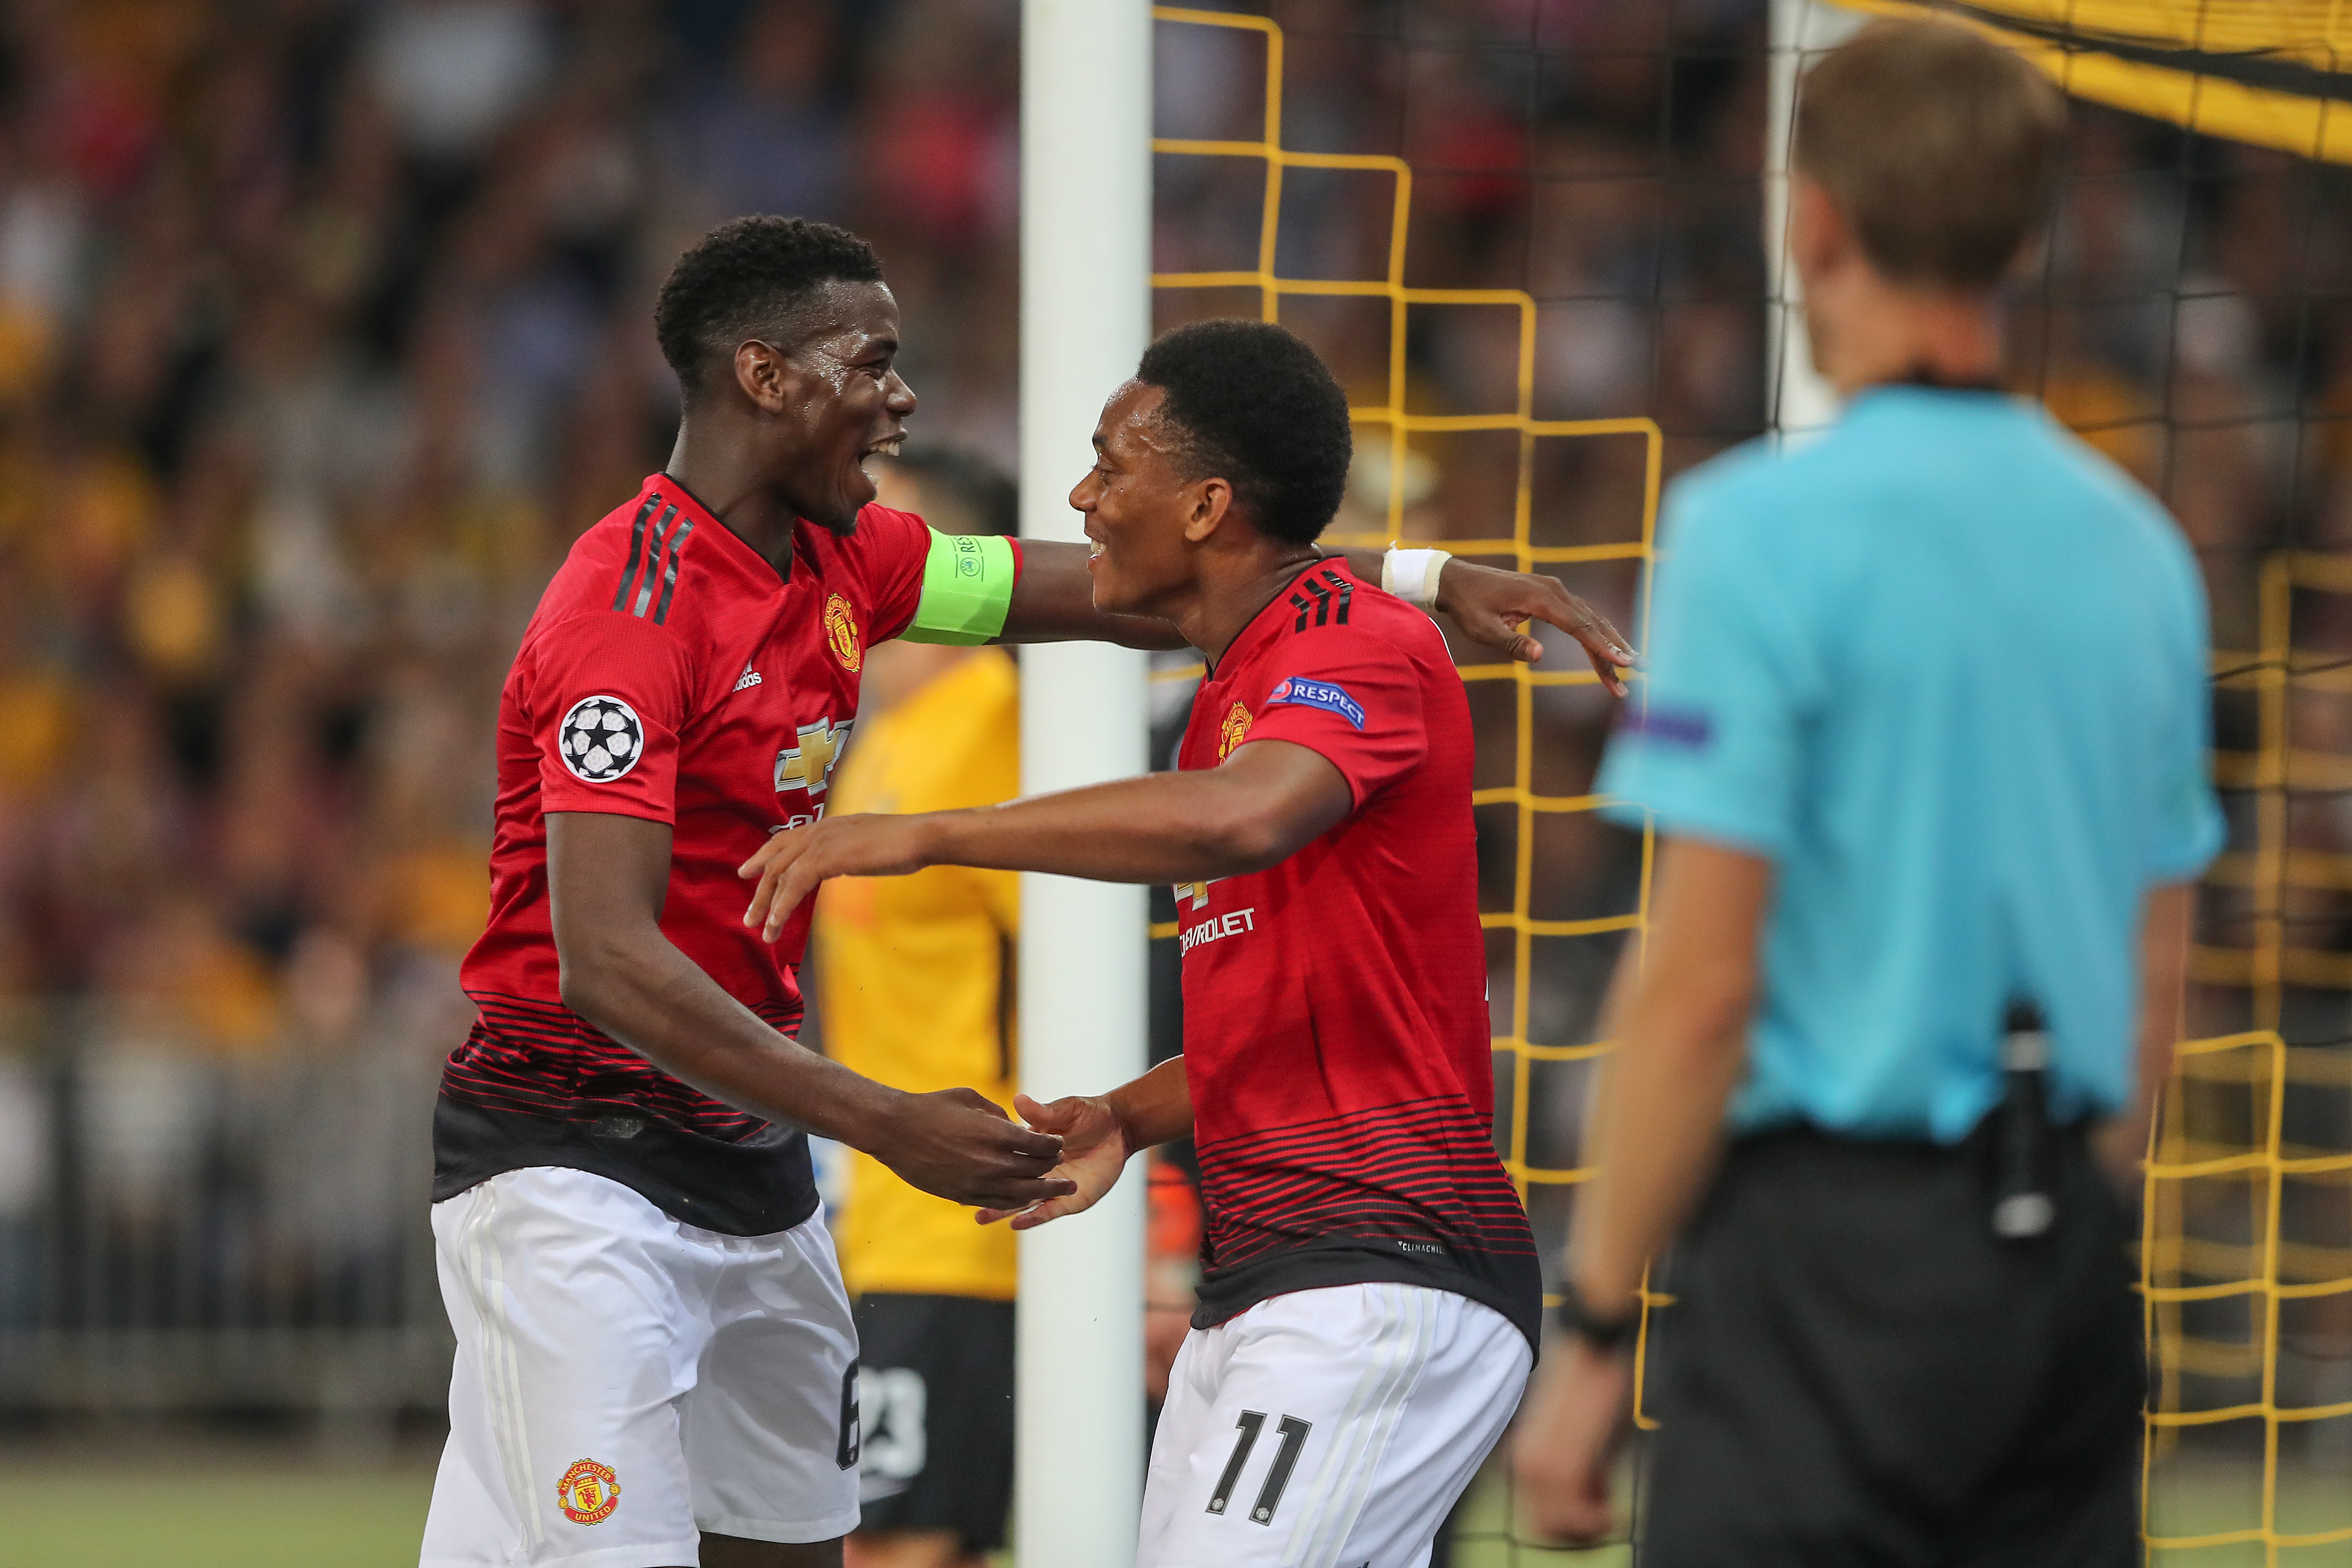 BERN, SWITZERLAND - SEPTEMBER 19:  Anthony Martial of Manchester United and Paul Pogba of Manchester United celebrate the third goal for Manchester during the Group H match of the UEFA Champions League between BSC Young Boys and Manchester United at Stade de Suisse, Wankdorf on September 19, 2018 in Bern, Switzerland. (Photo by Christian Kaspar-Bartke/Getty Images)